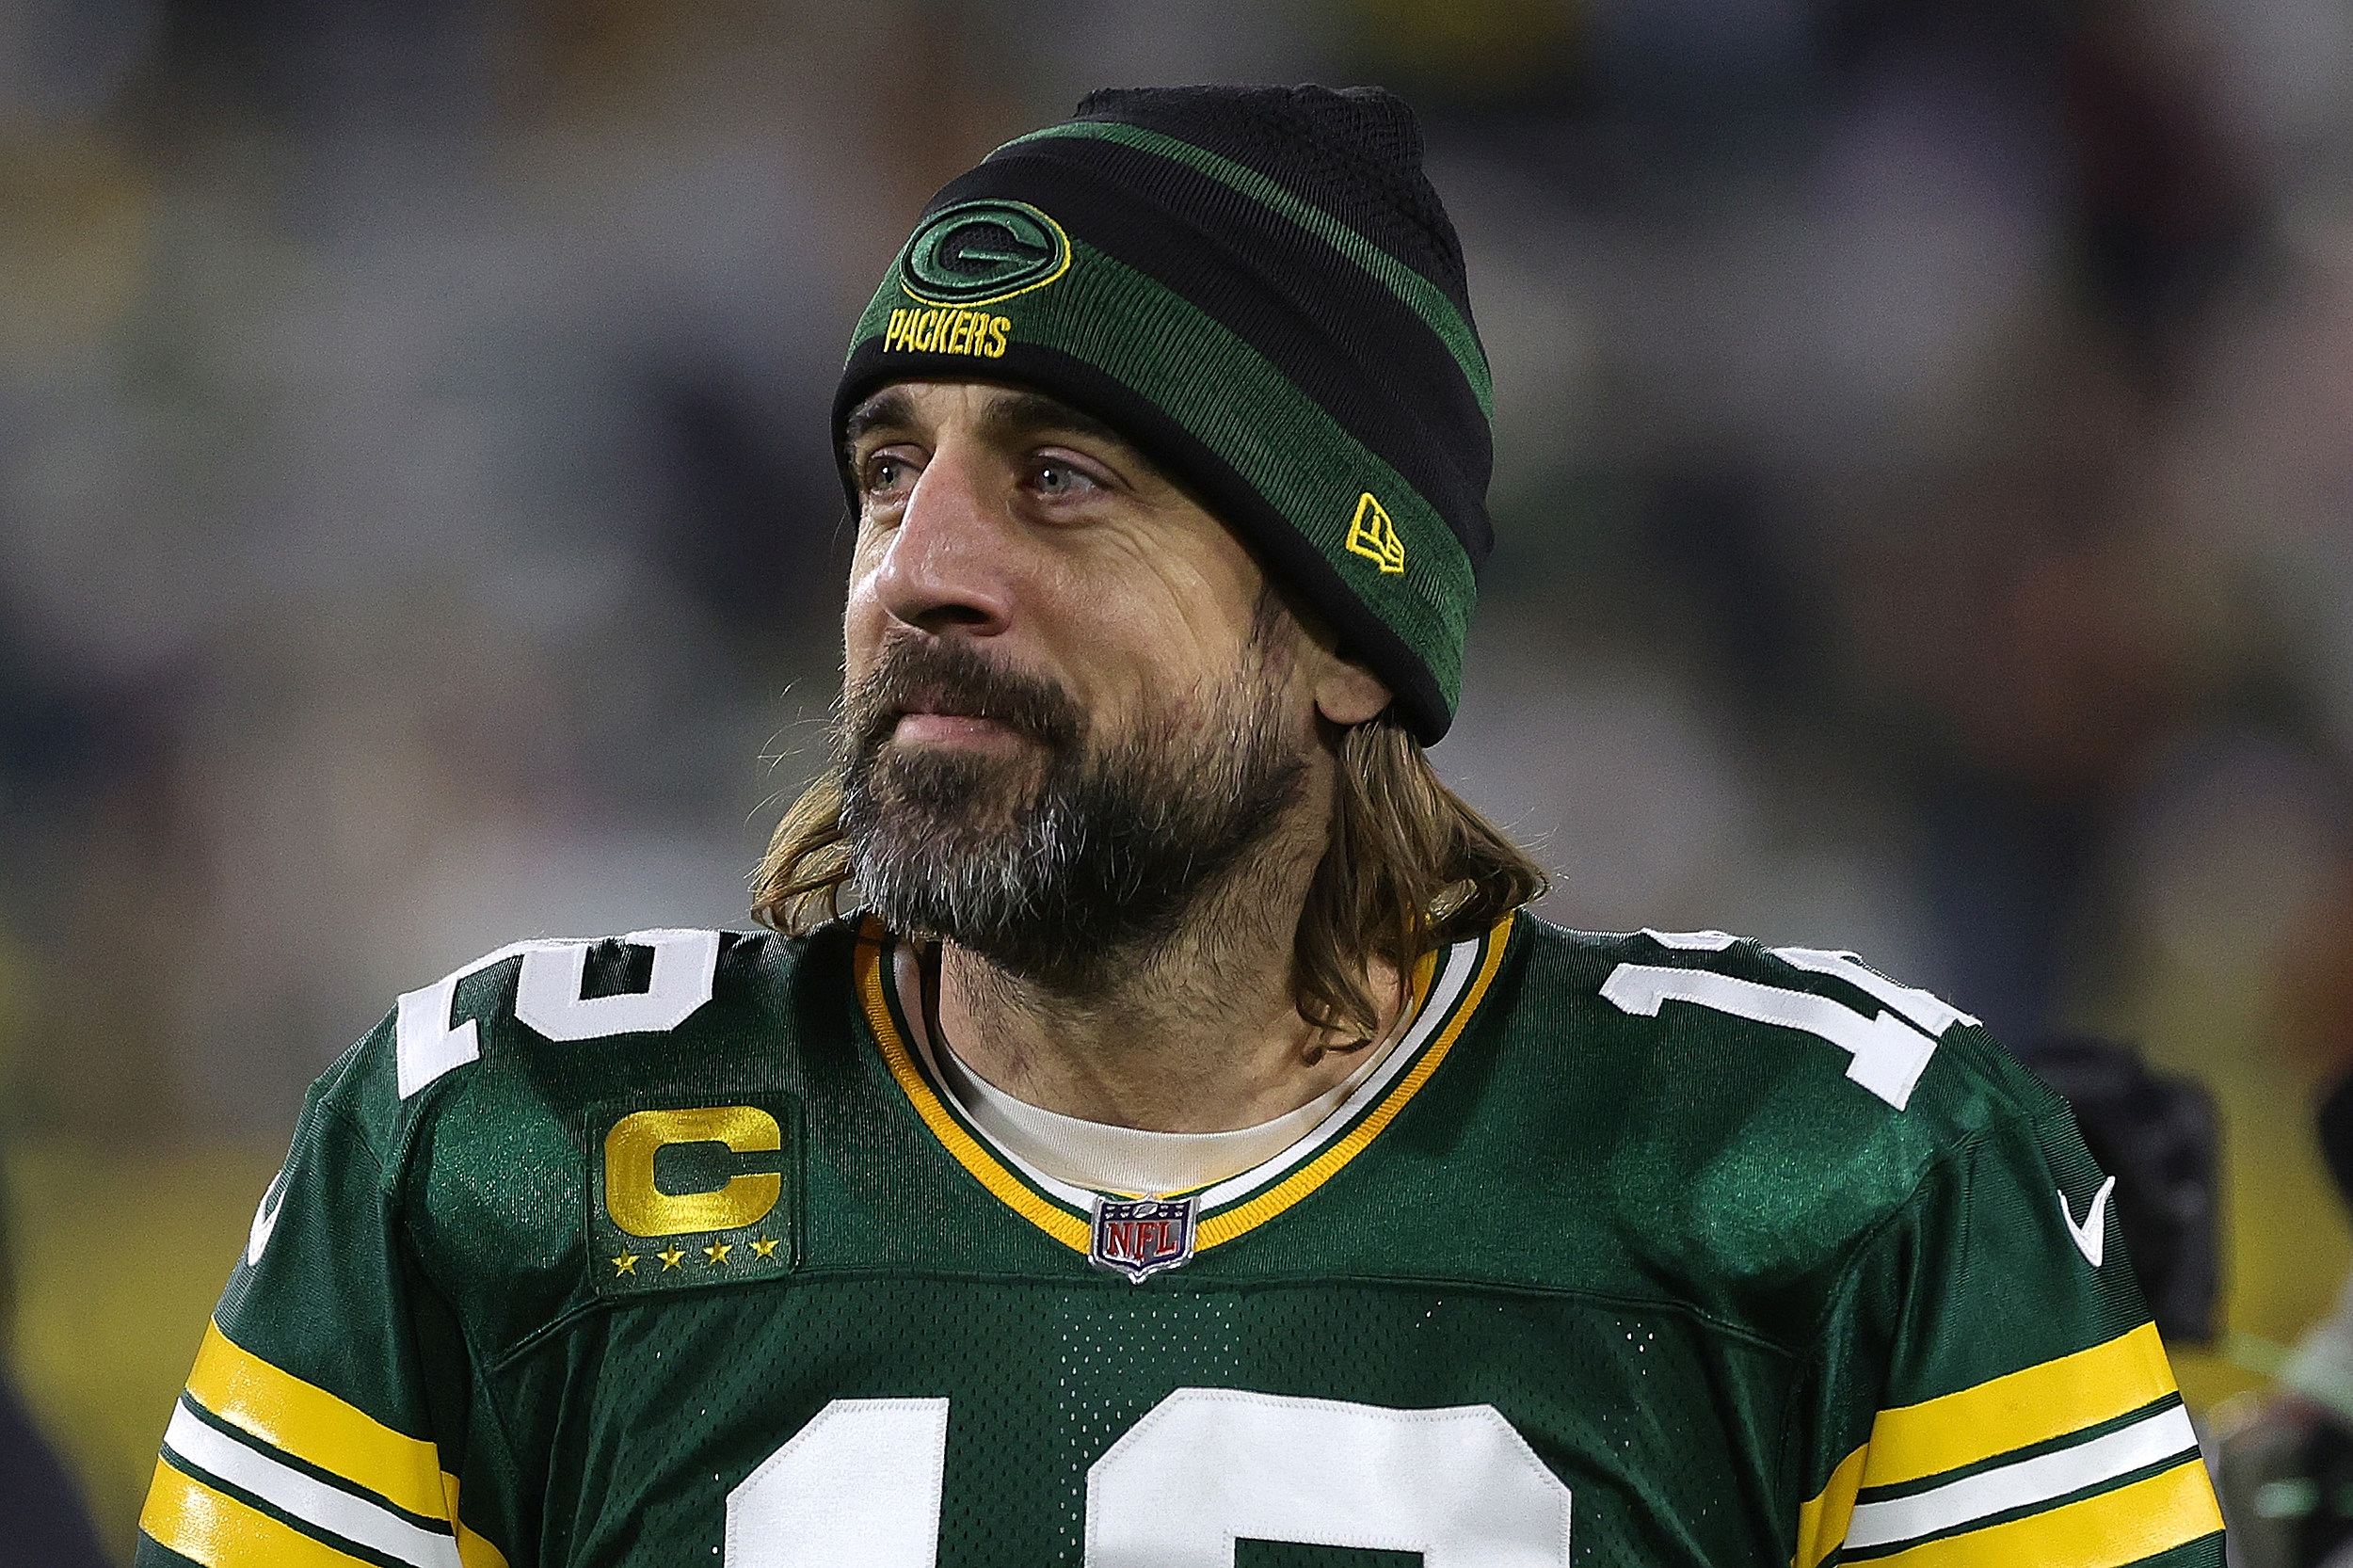 Green Bay Packers Alternate Uniform Ranked Worst In NFL